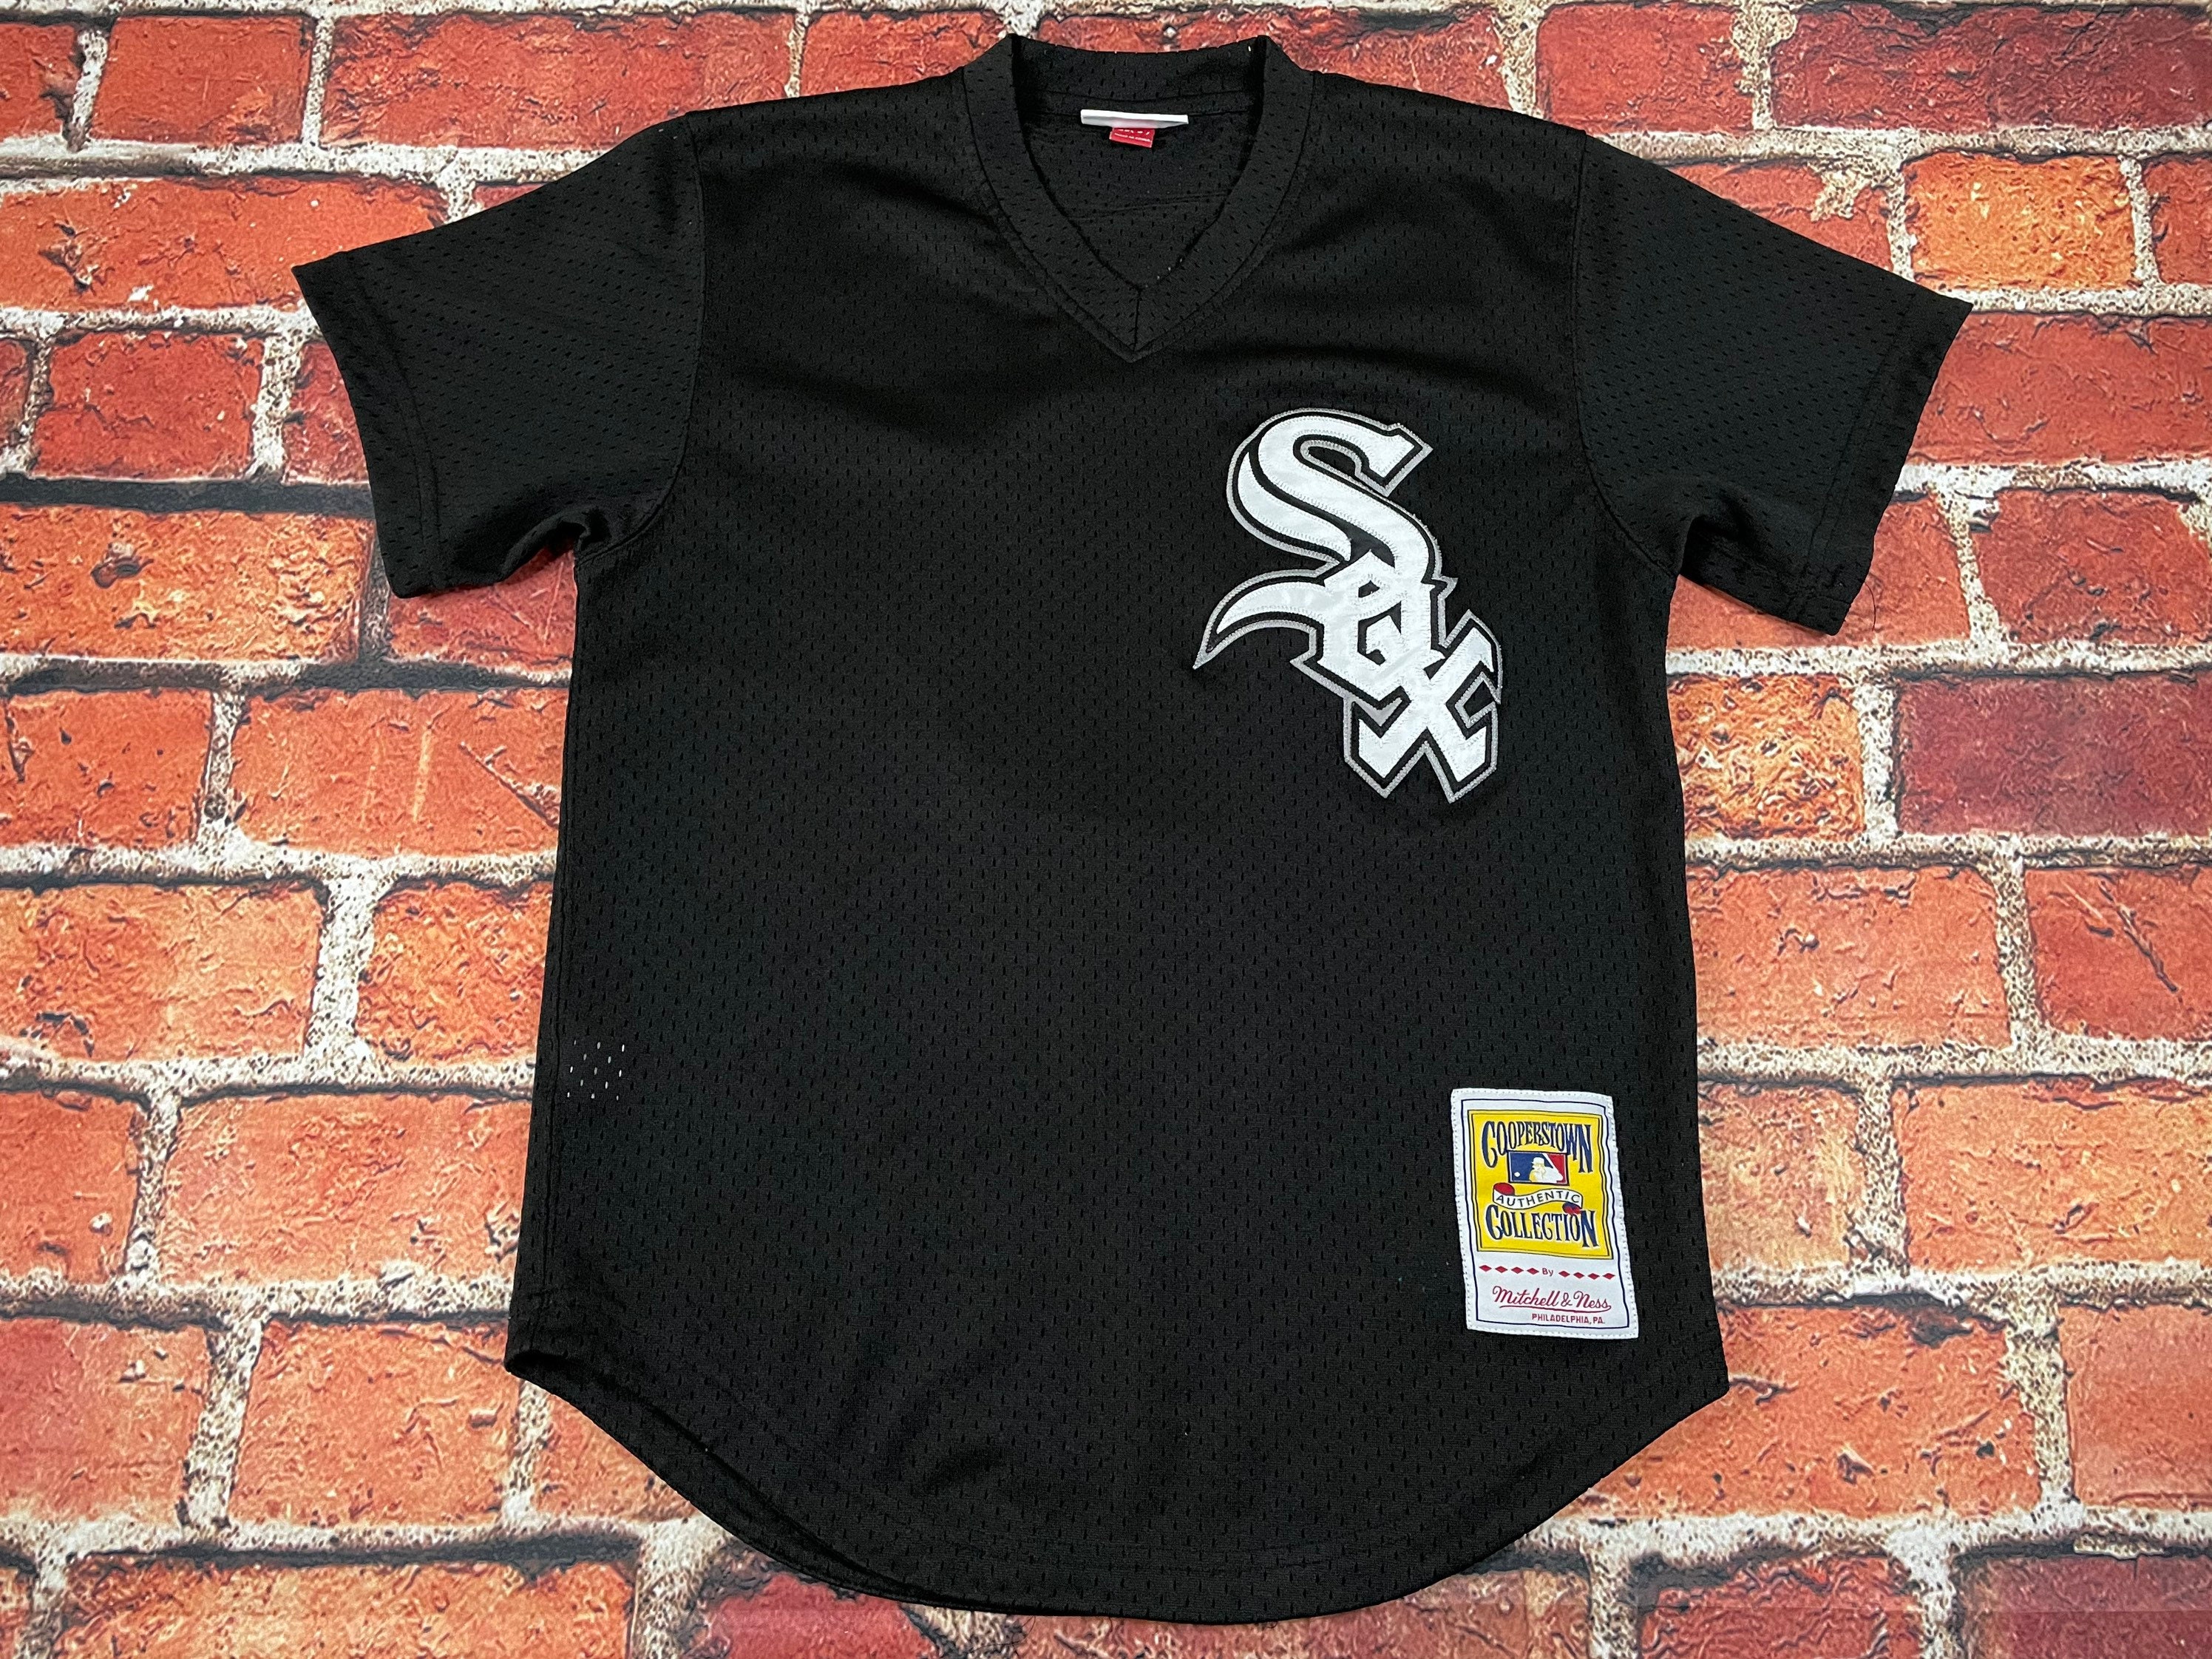 Mitchell & Ness Youth Mitchell & Ness Bo Jackson Black Chicago White Sox  Cooperstown Collection Mesh Batting Practice Jersey